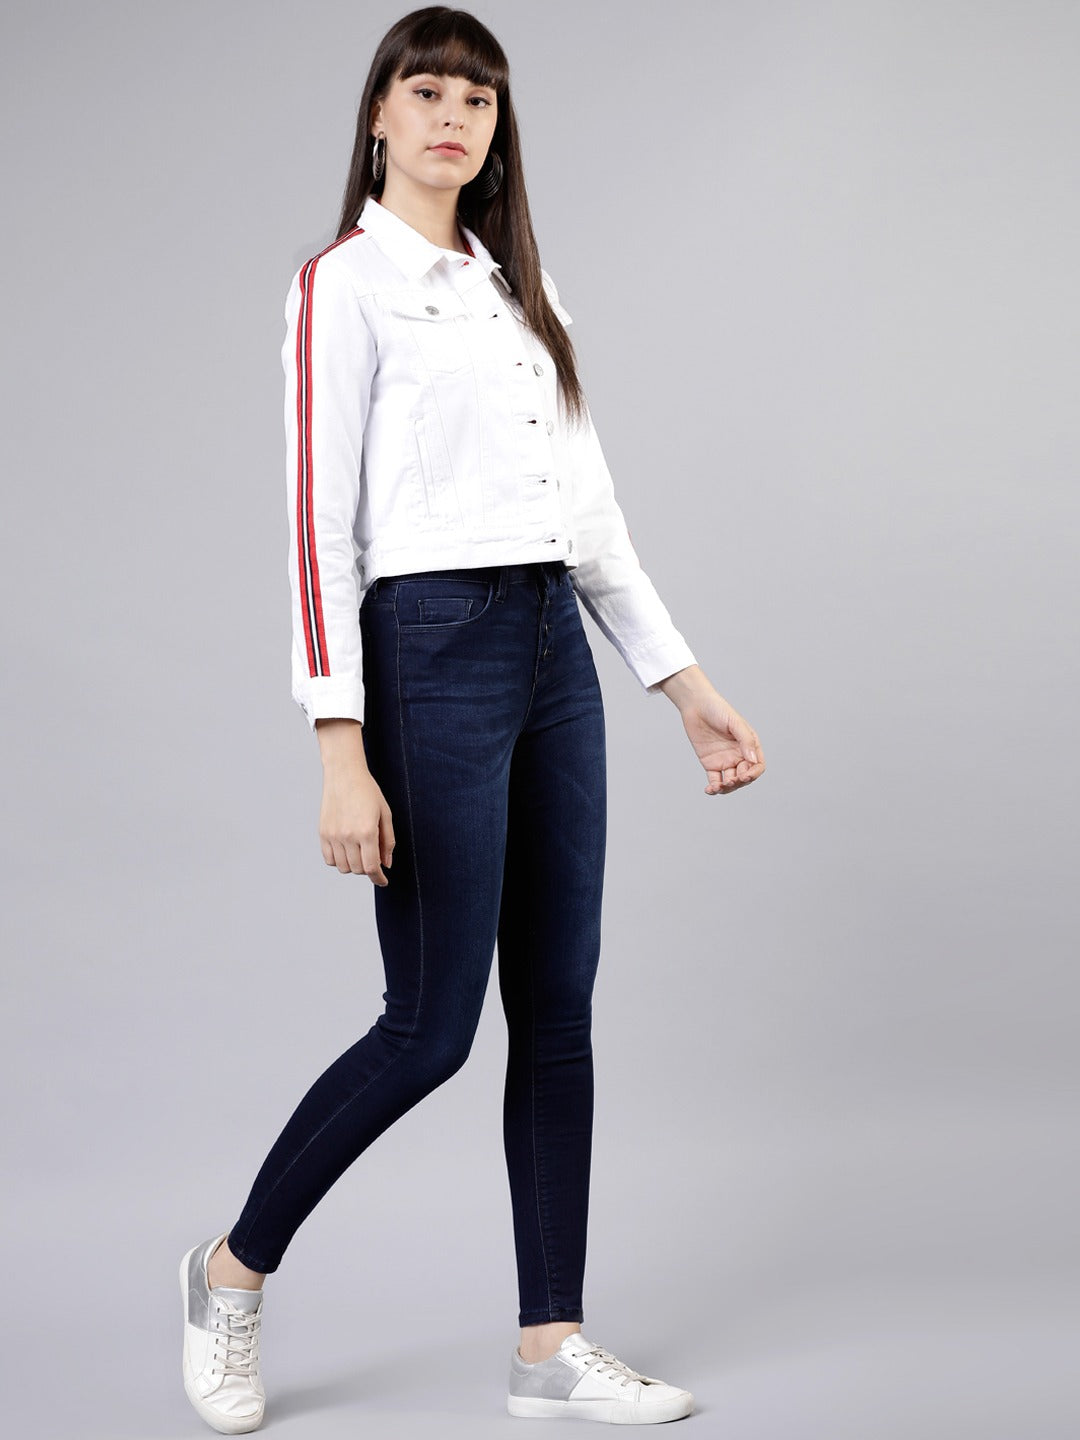 White women's denim jacket with red stripes, paired with navy skinny jeans and white sneakers, showcased against a plain background.